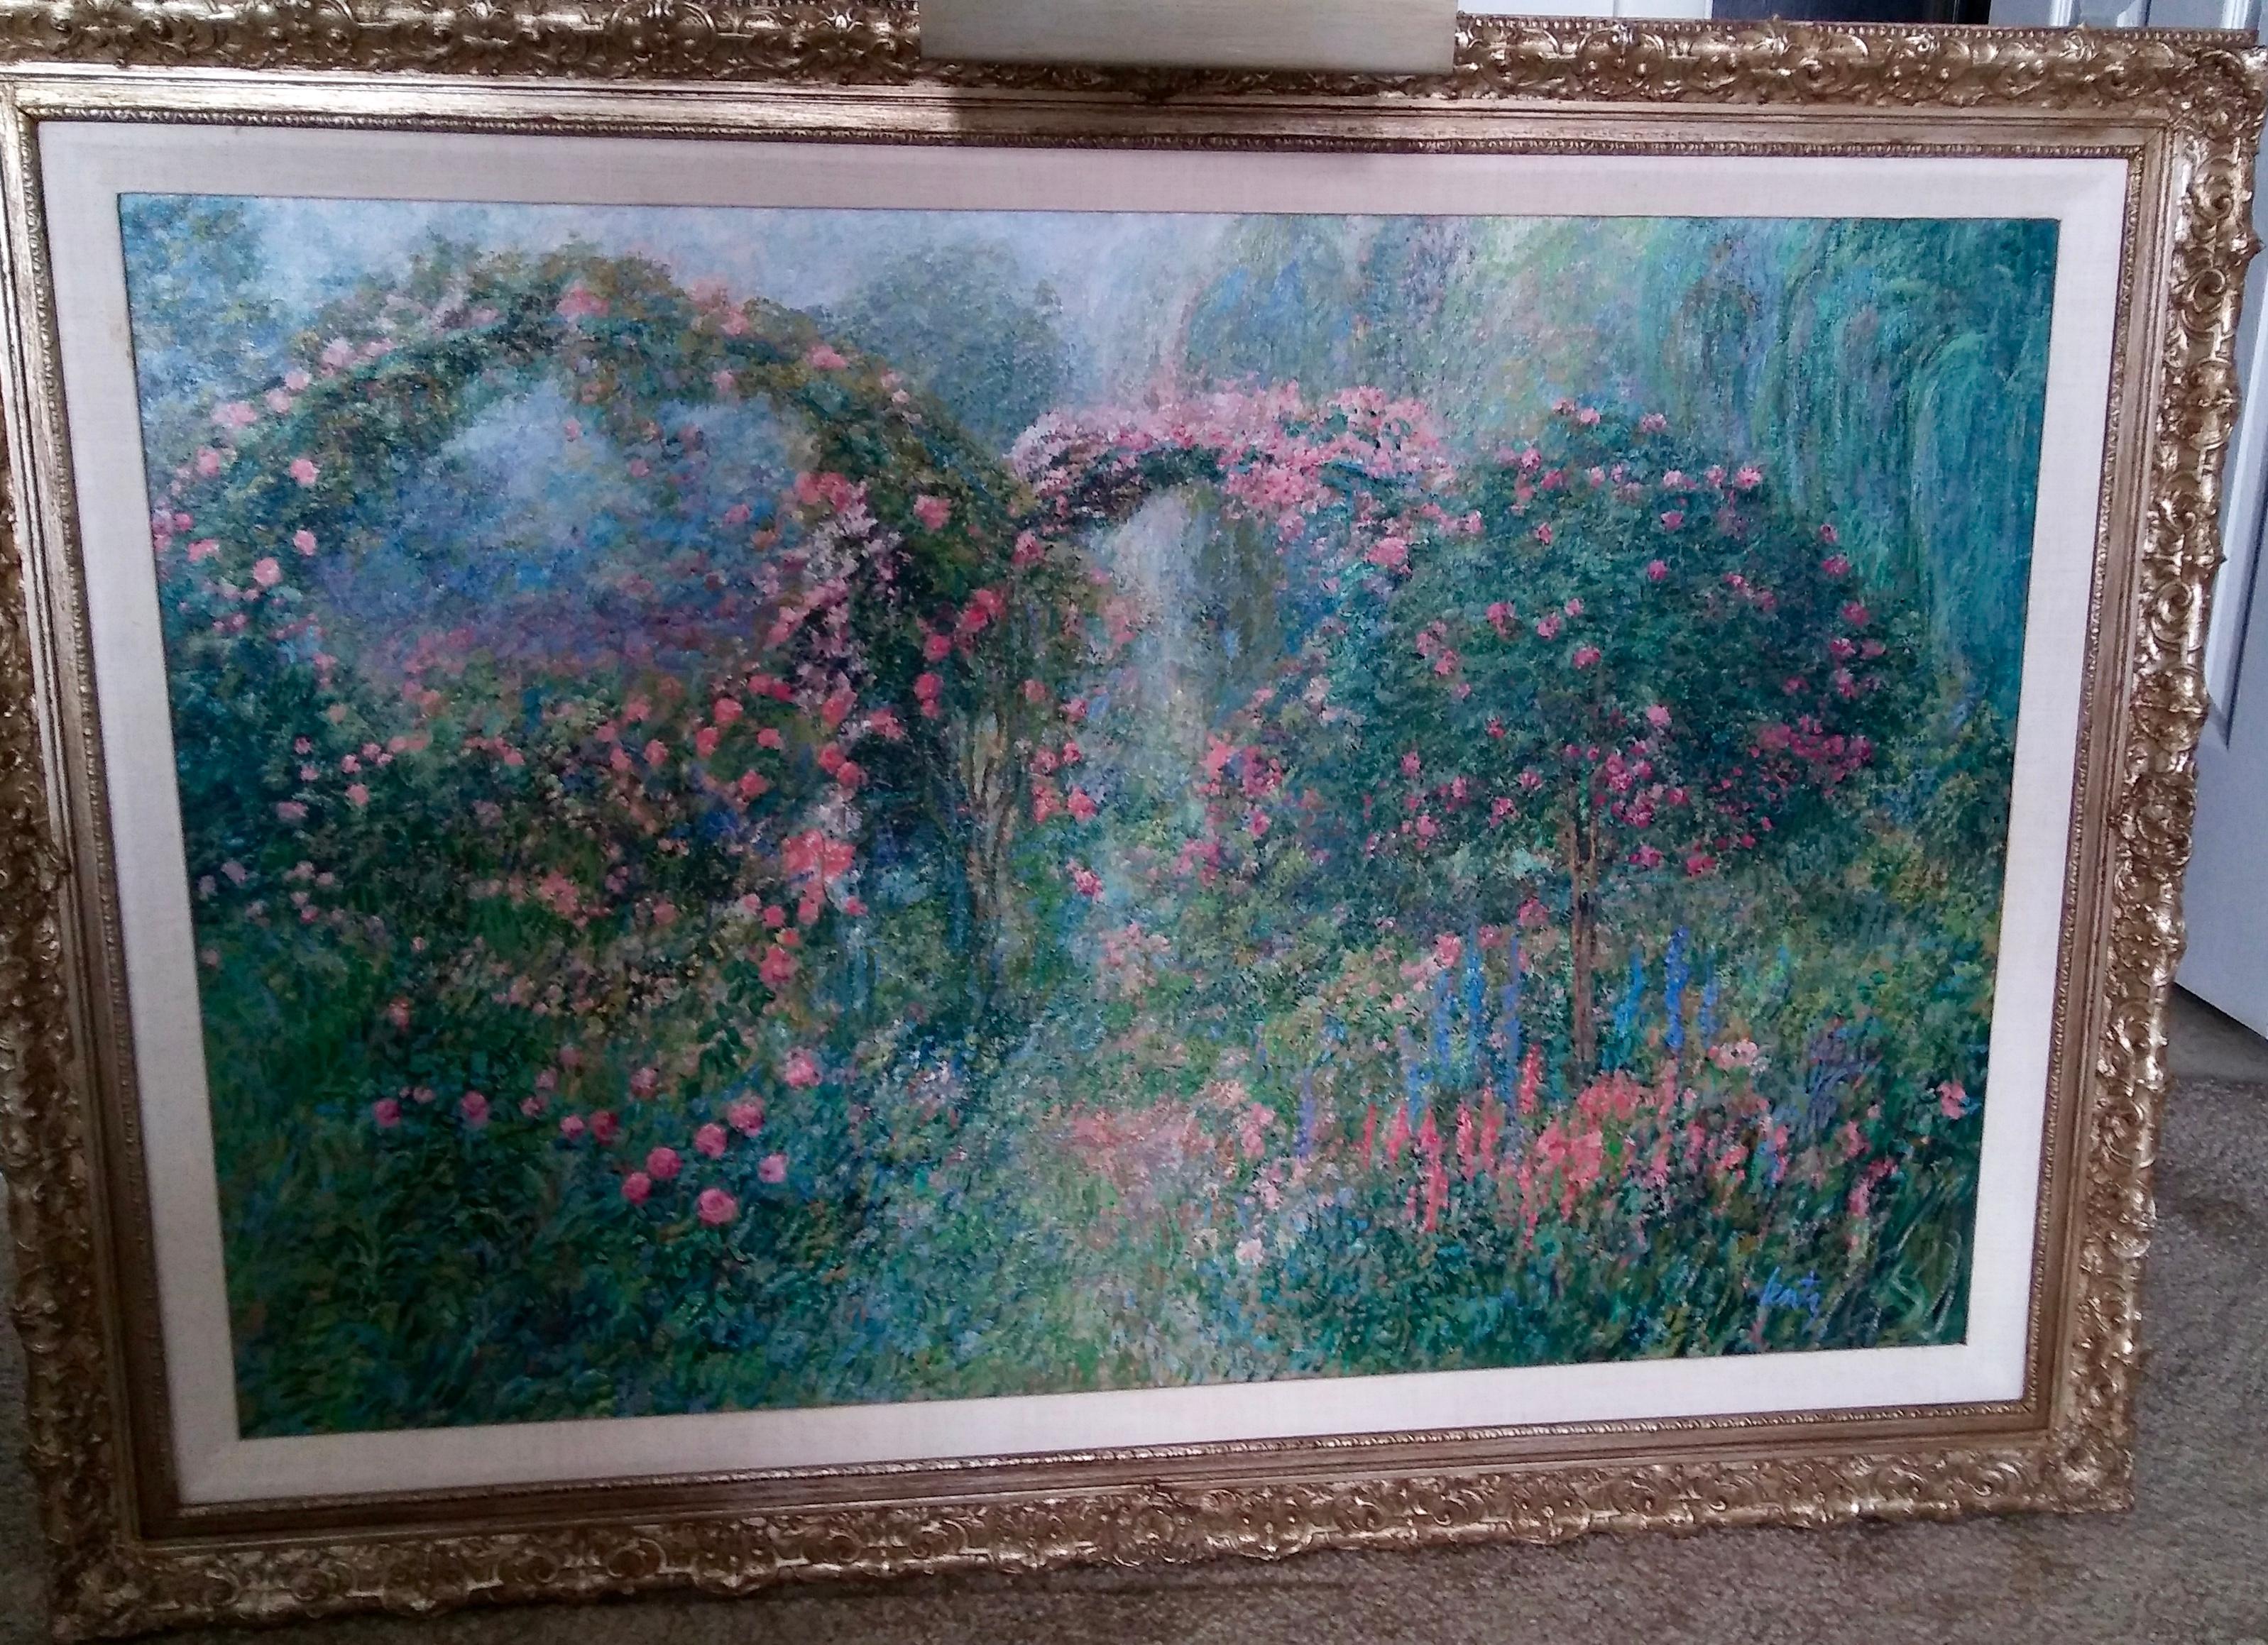 Jance Lentz Landscape Painting - "Rose Arches, Giverny"   Impresionism  Framed :42 5/8" x 30 1/2"  "In Stock"